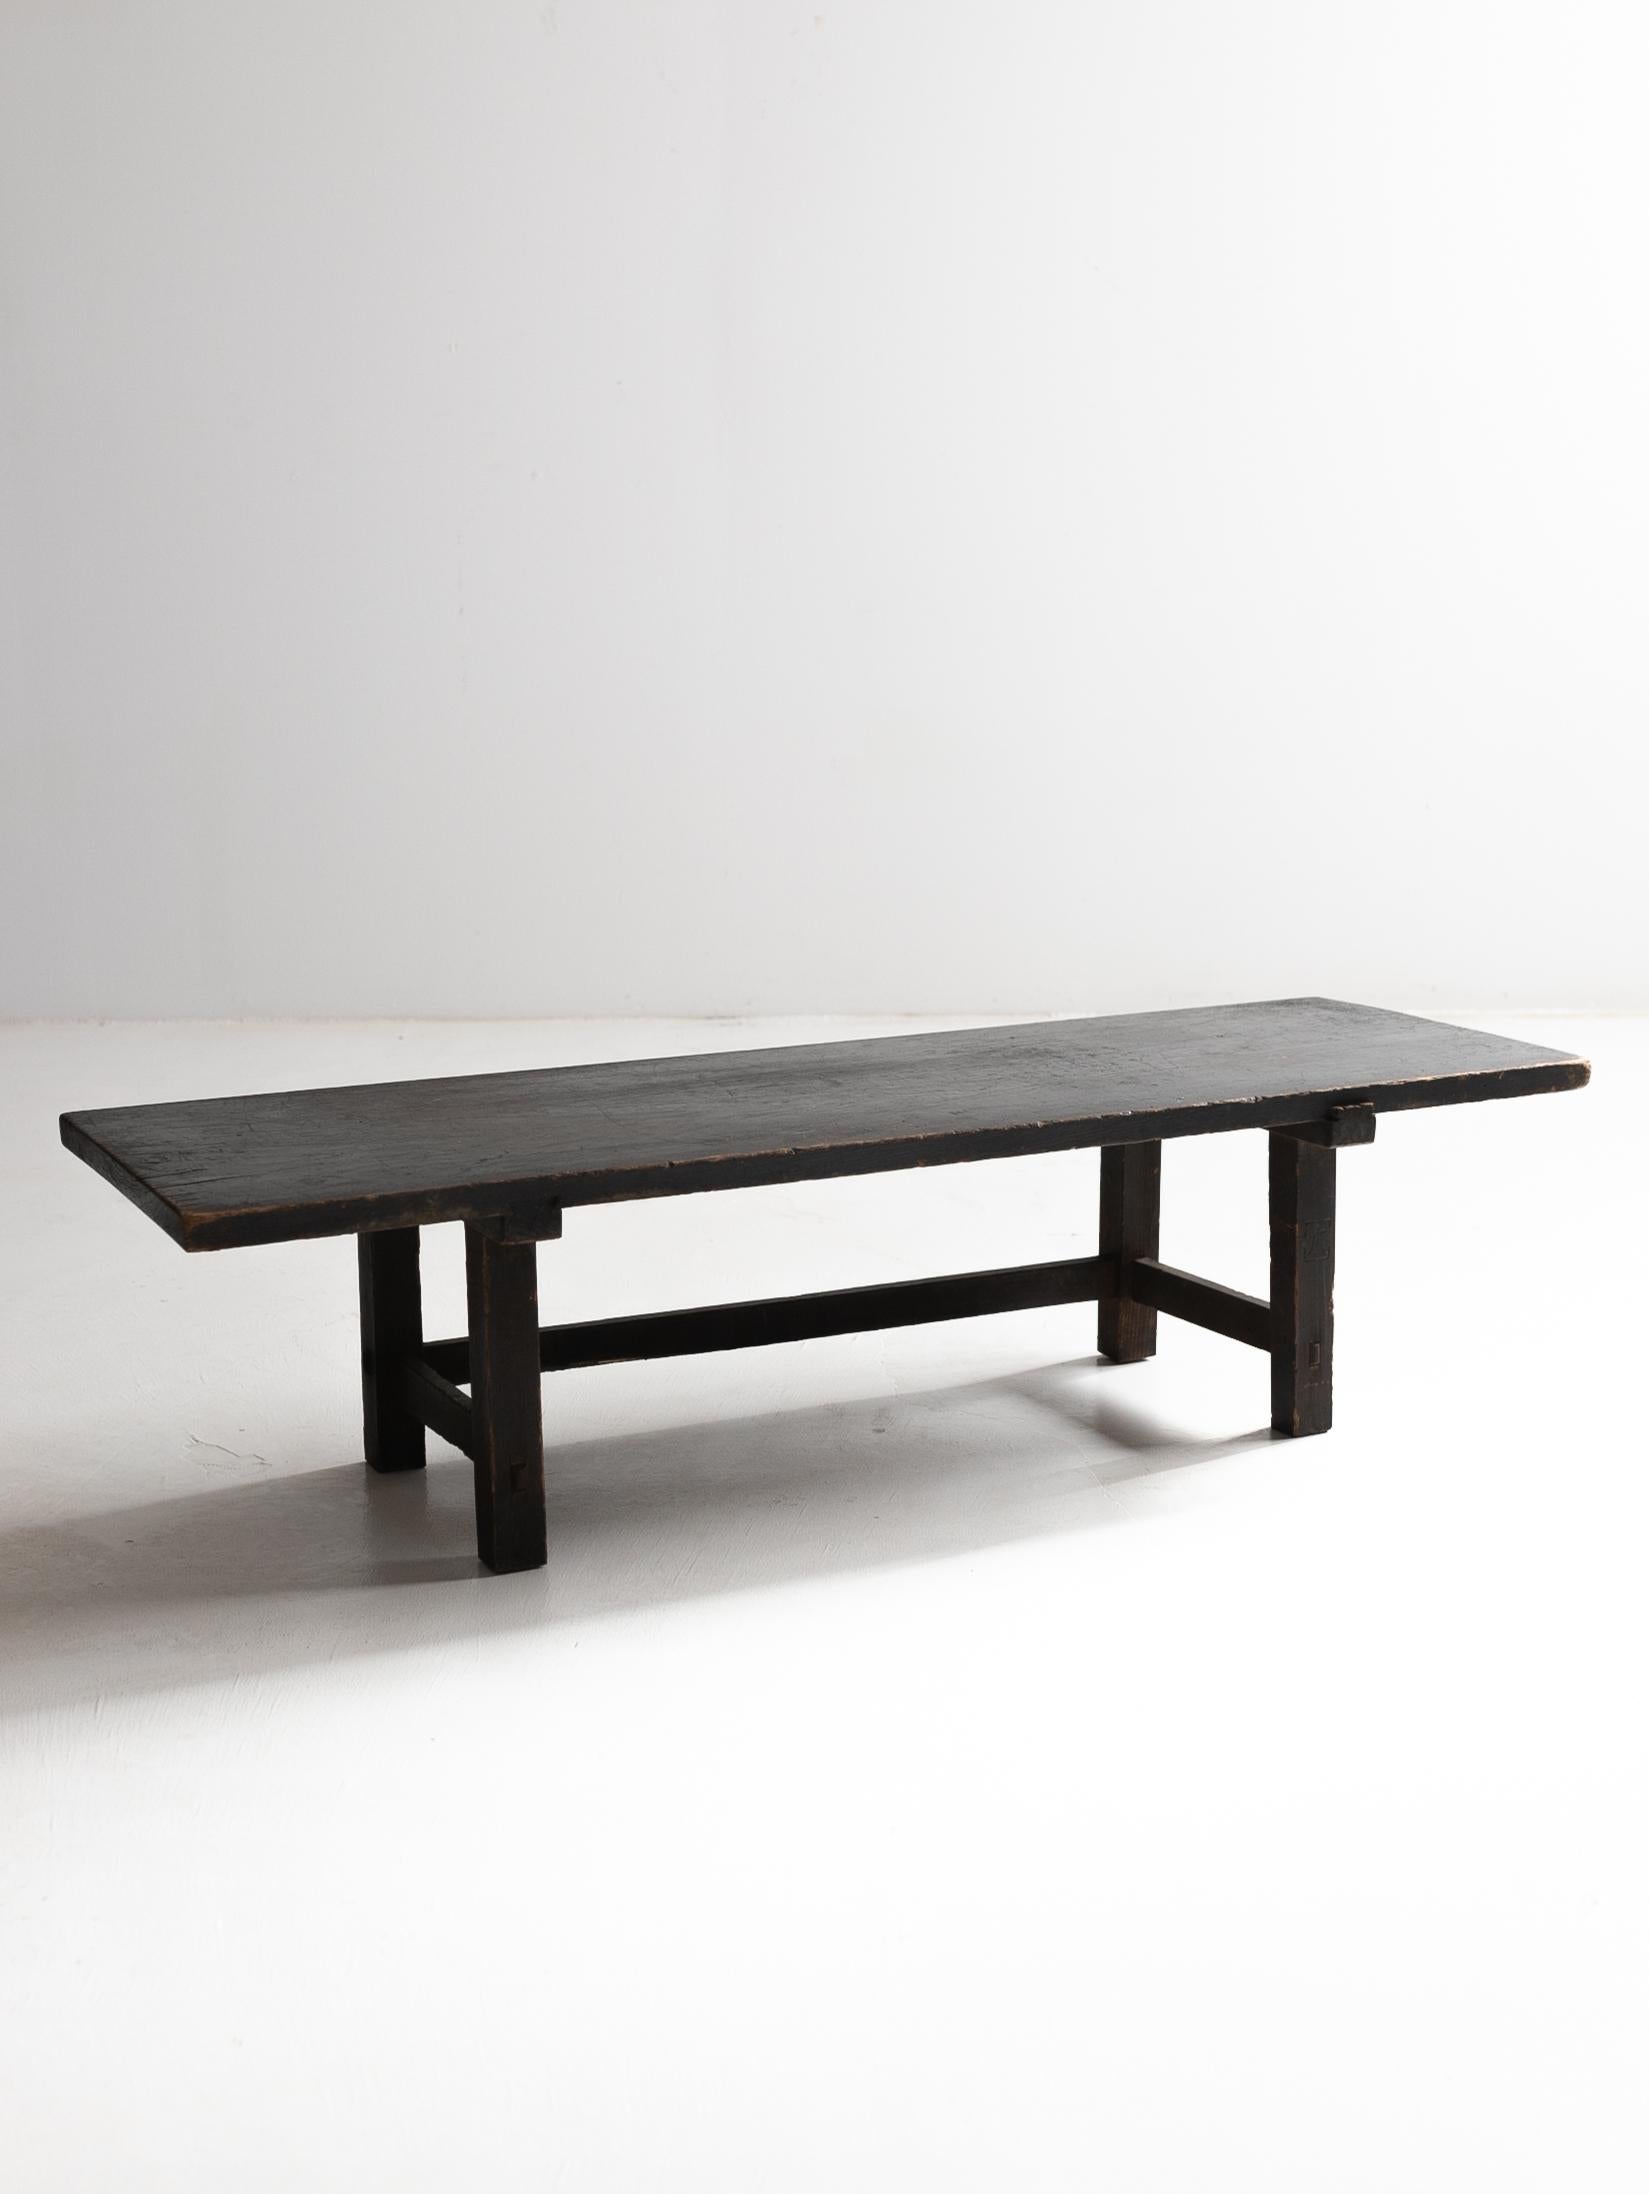 19th Century Japanese old wooden low table/ wabisabi coffee table/1850-1920 For Sale